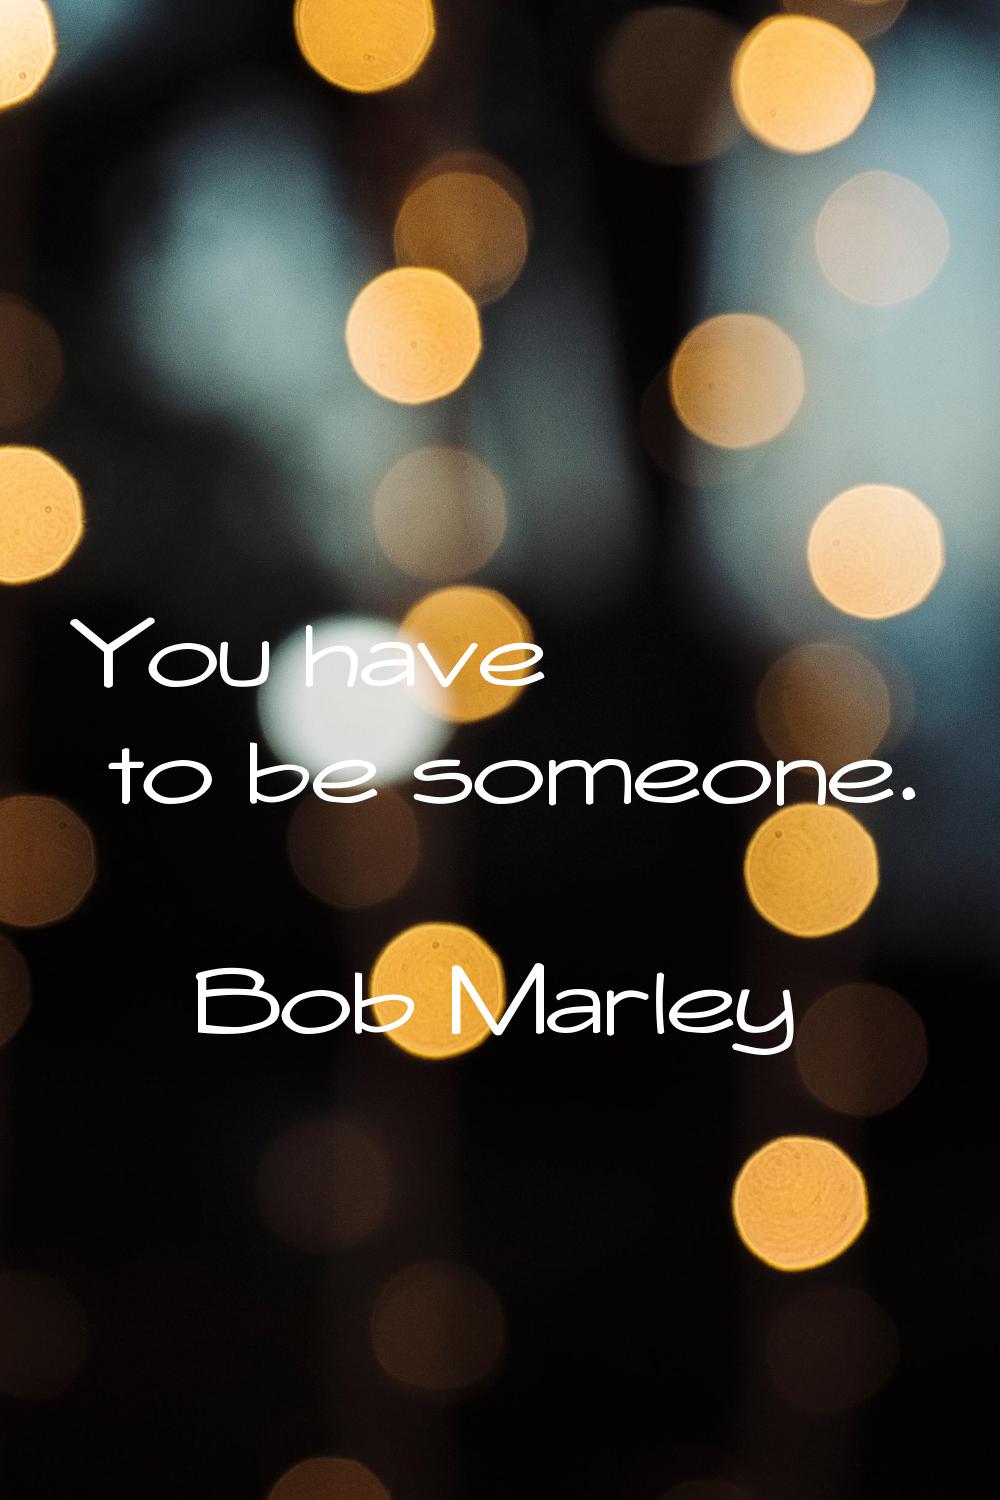 You have to be someone.